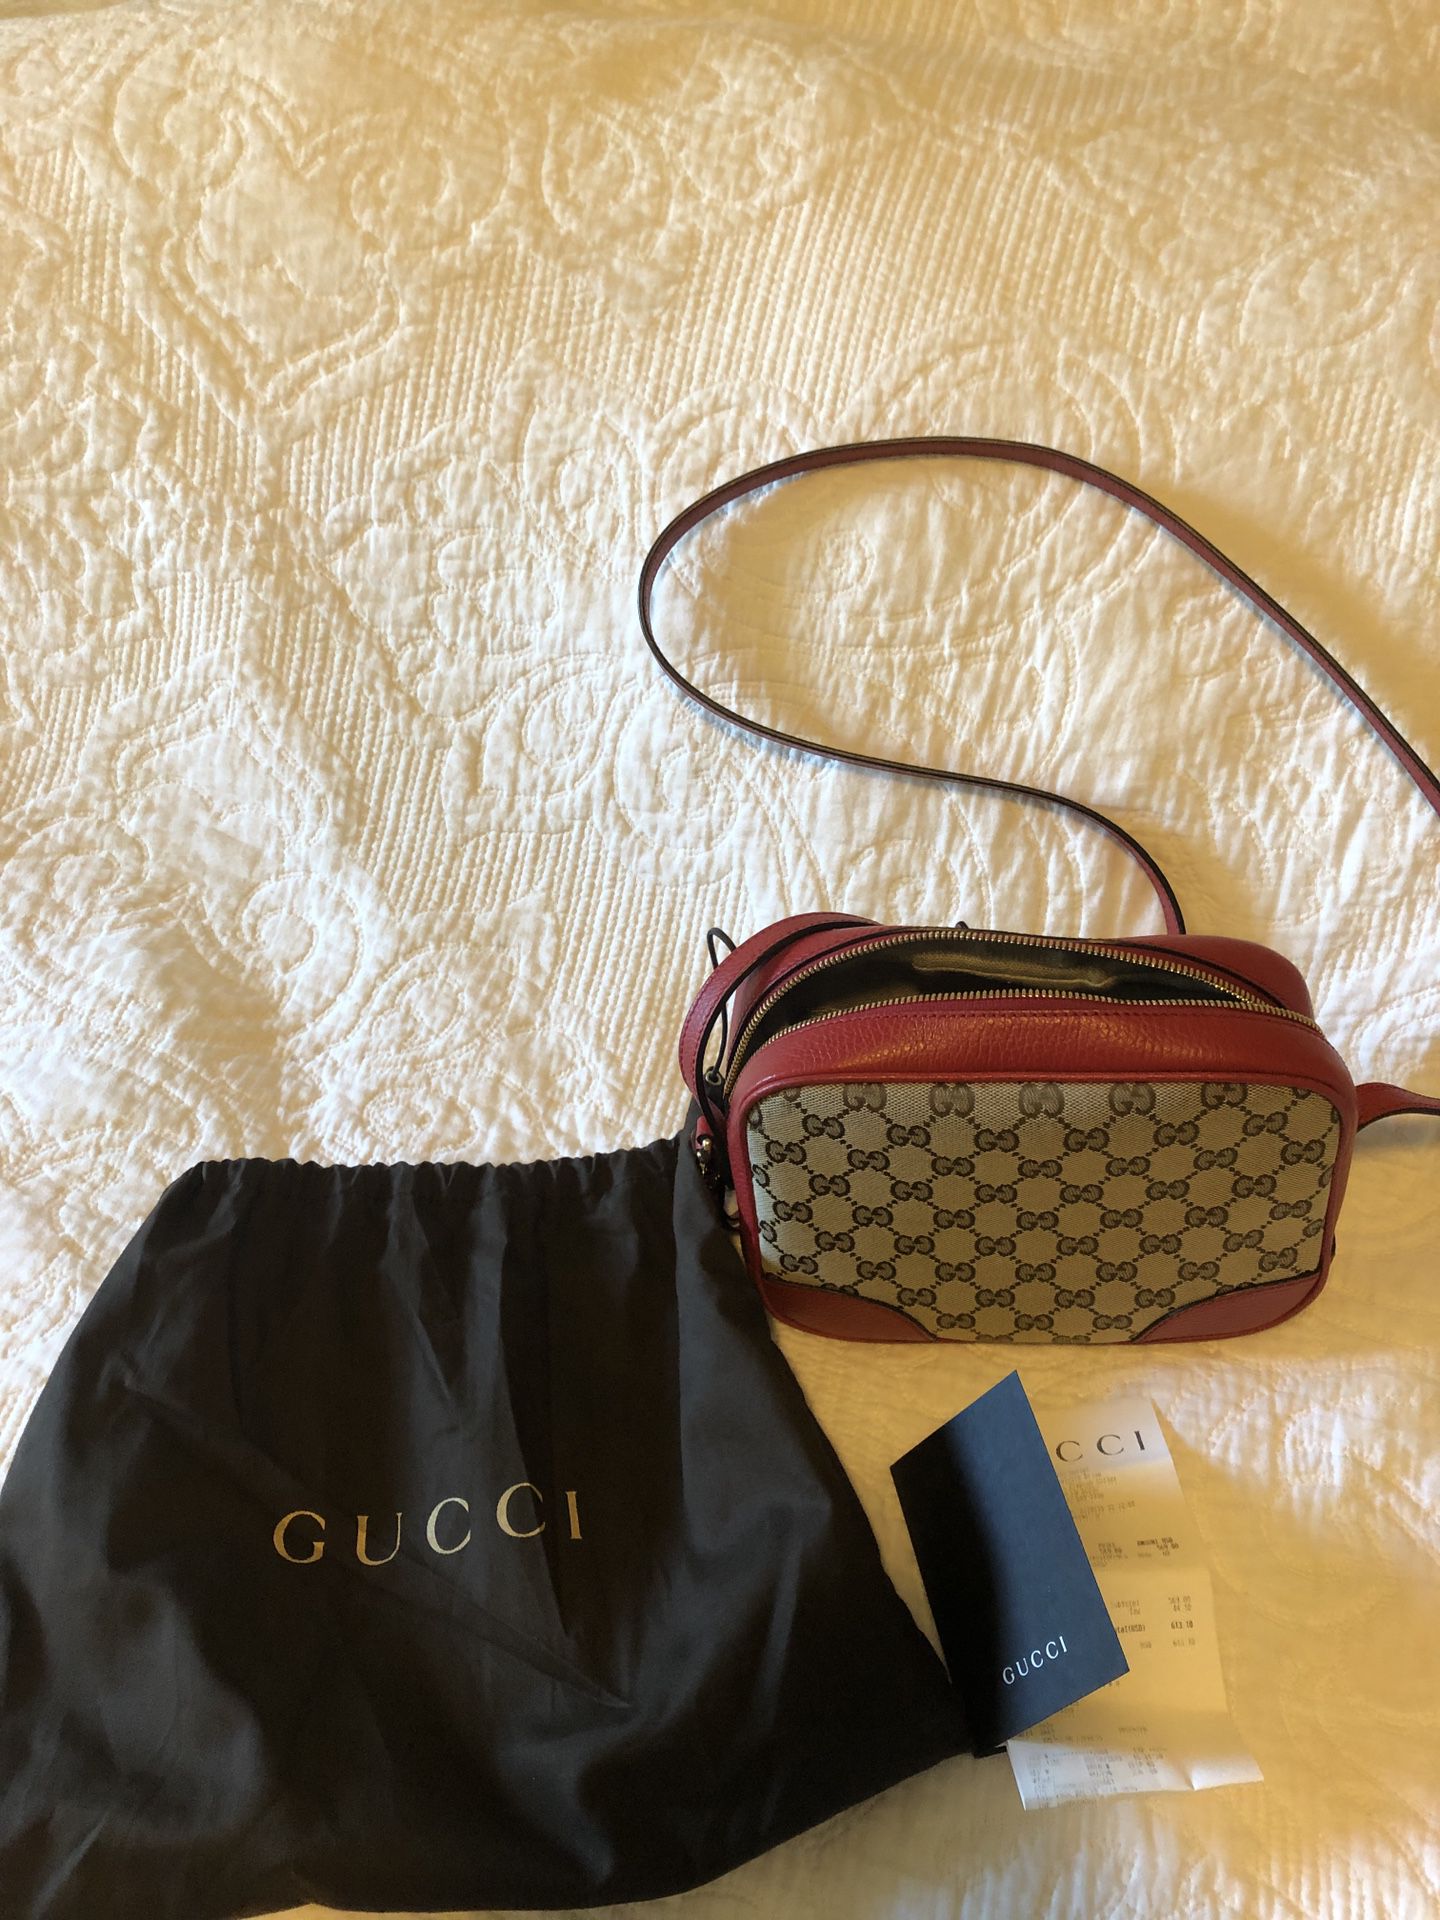 Authentic Gucci Canera Bag with Receipt